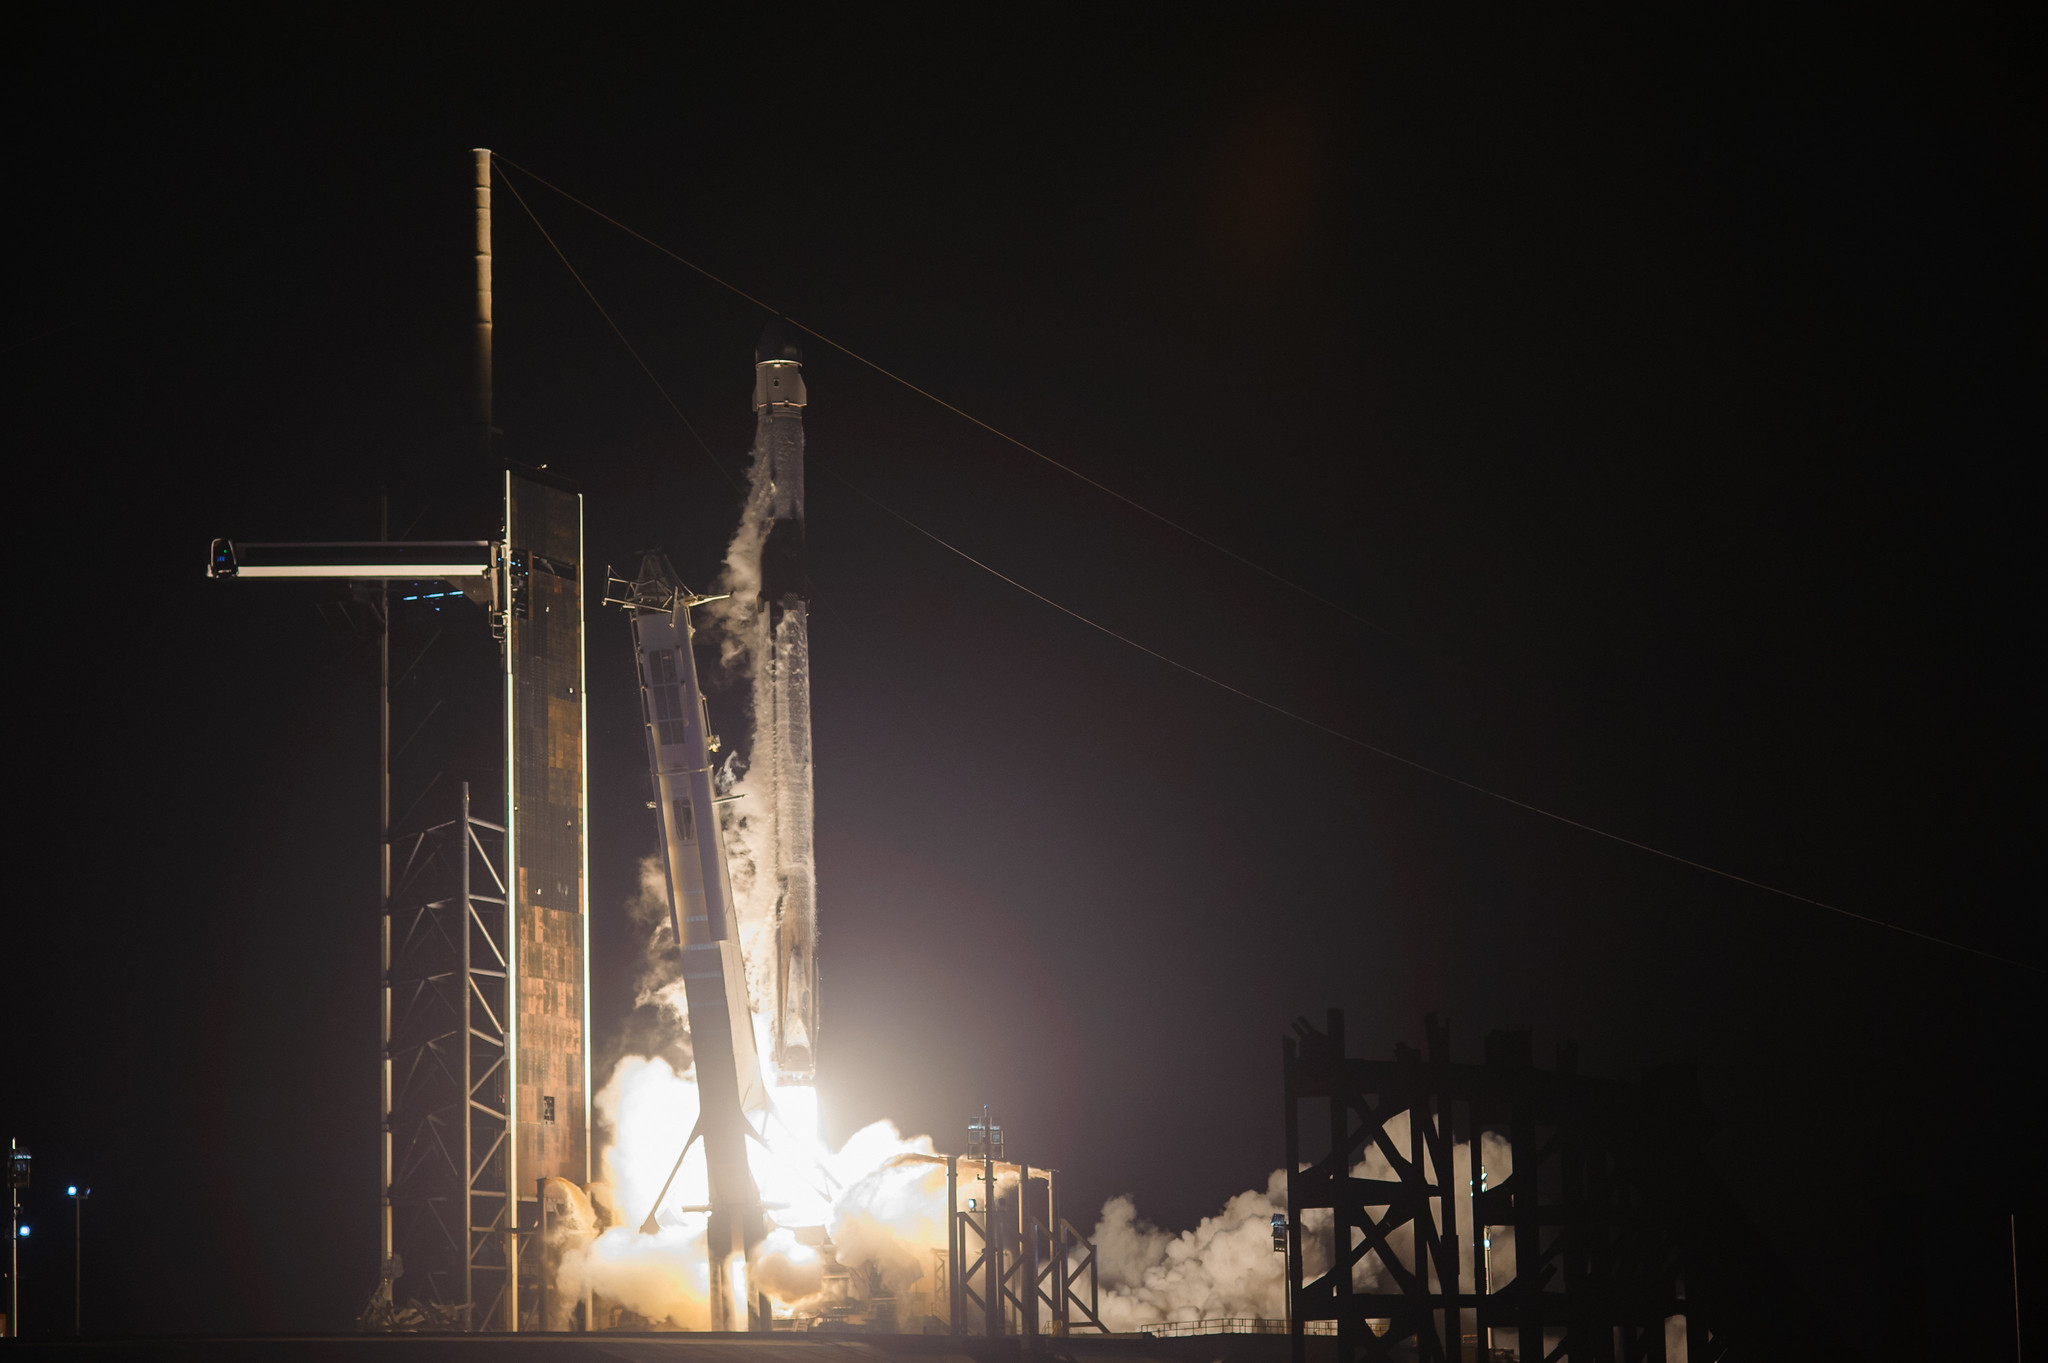 A SpaceX Falcon 9 rocket lifts off from Launch Complex 39A at NASA’s Kennedy Space Center in Florida at 3:14 a.m. on Aug. 29, 2021.